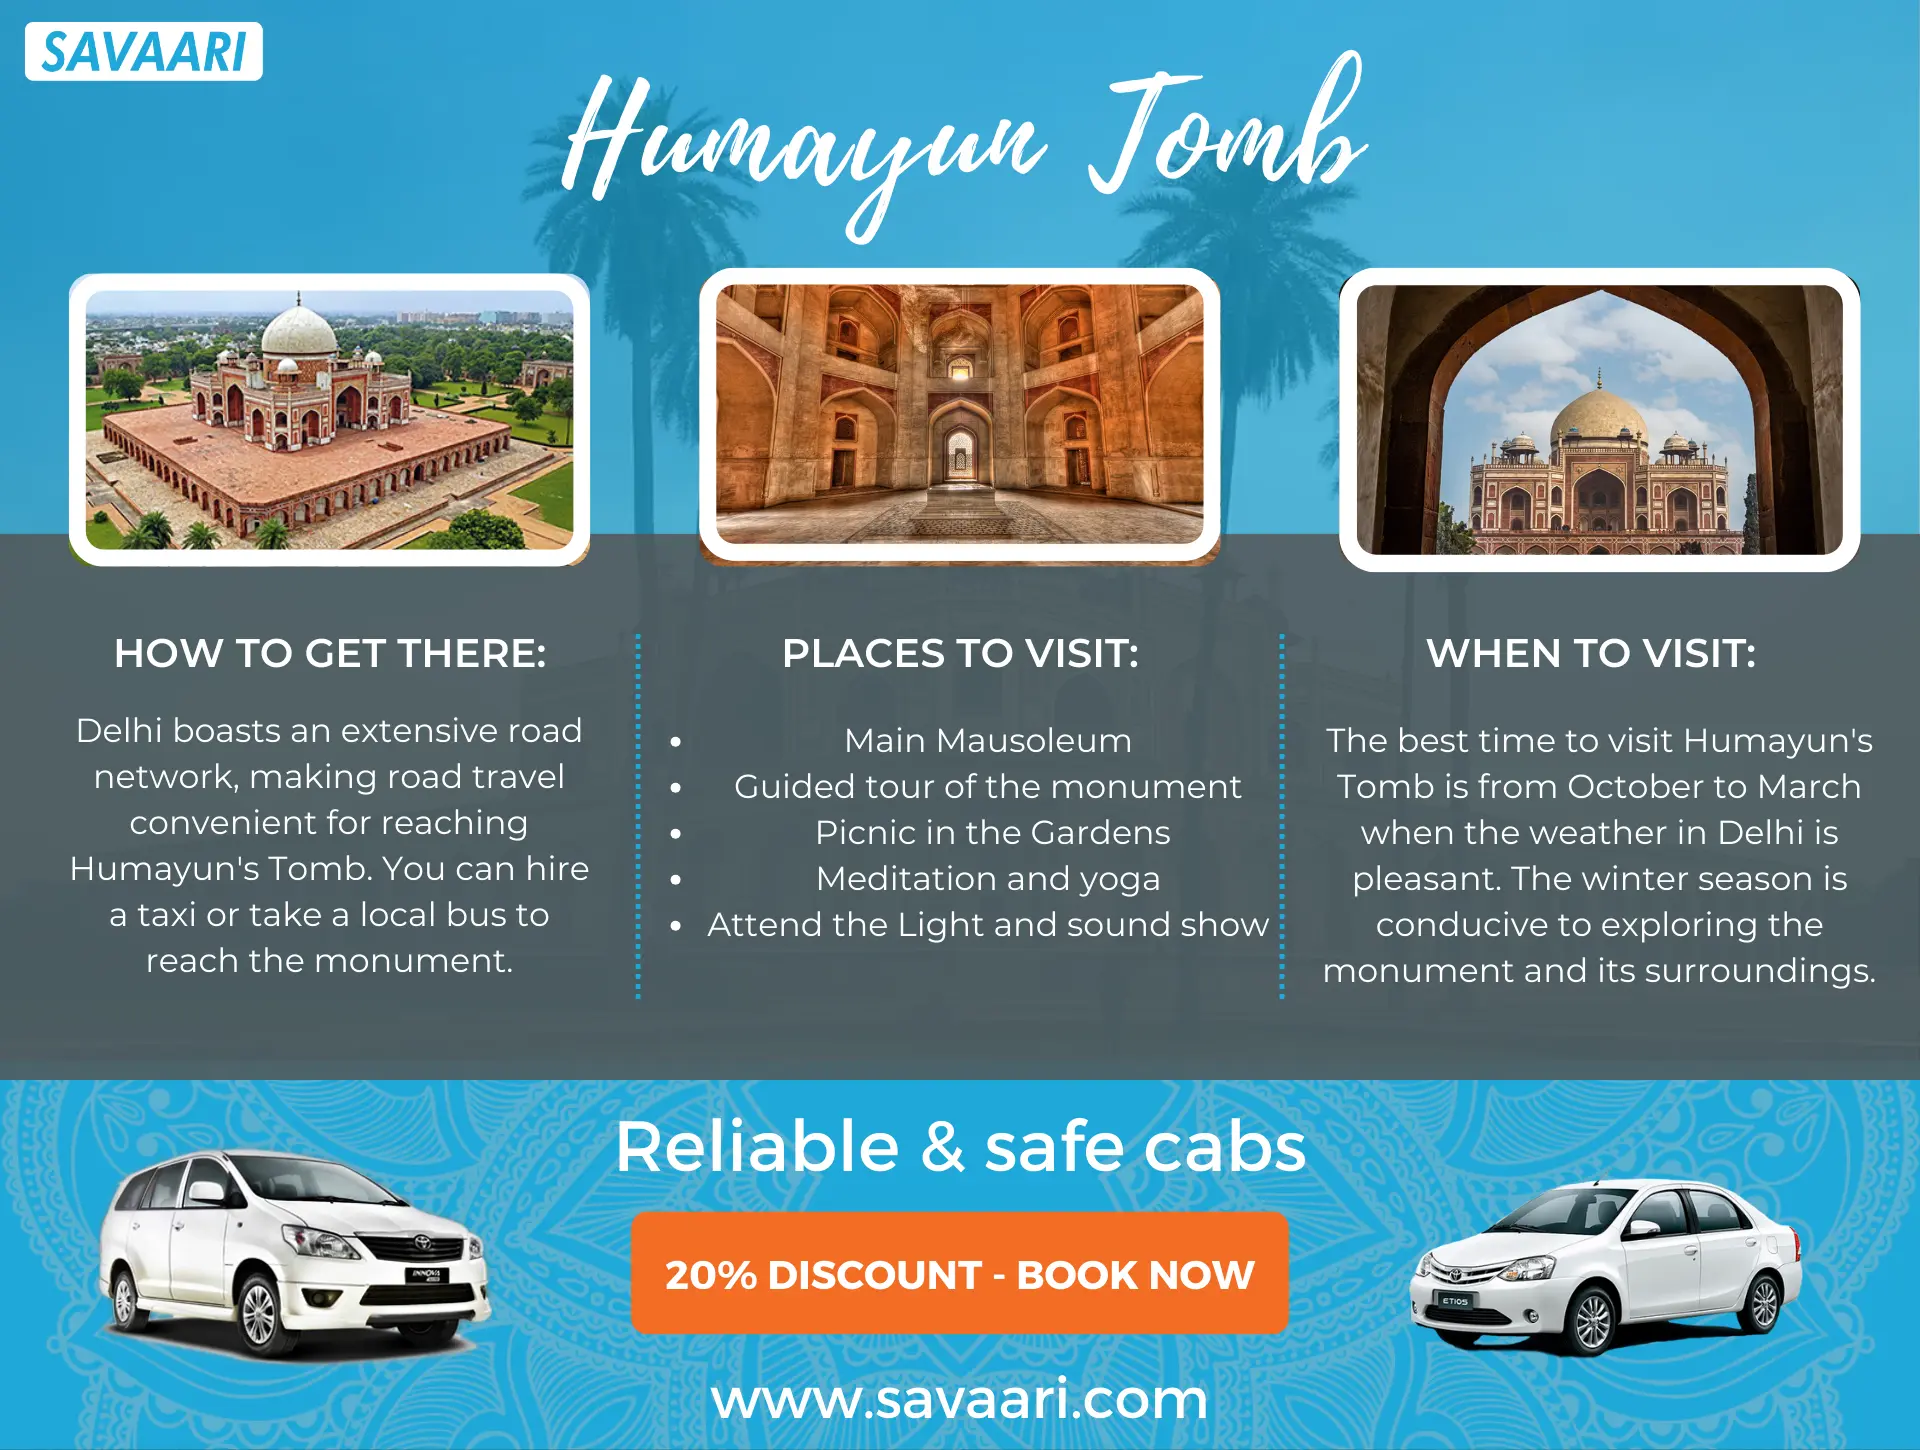 Things to do in Humayun Tomb